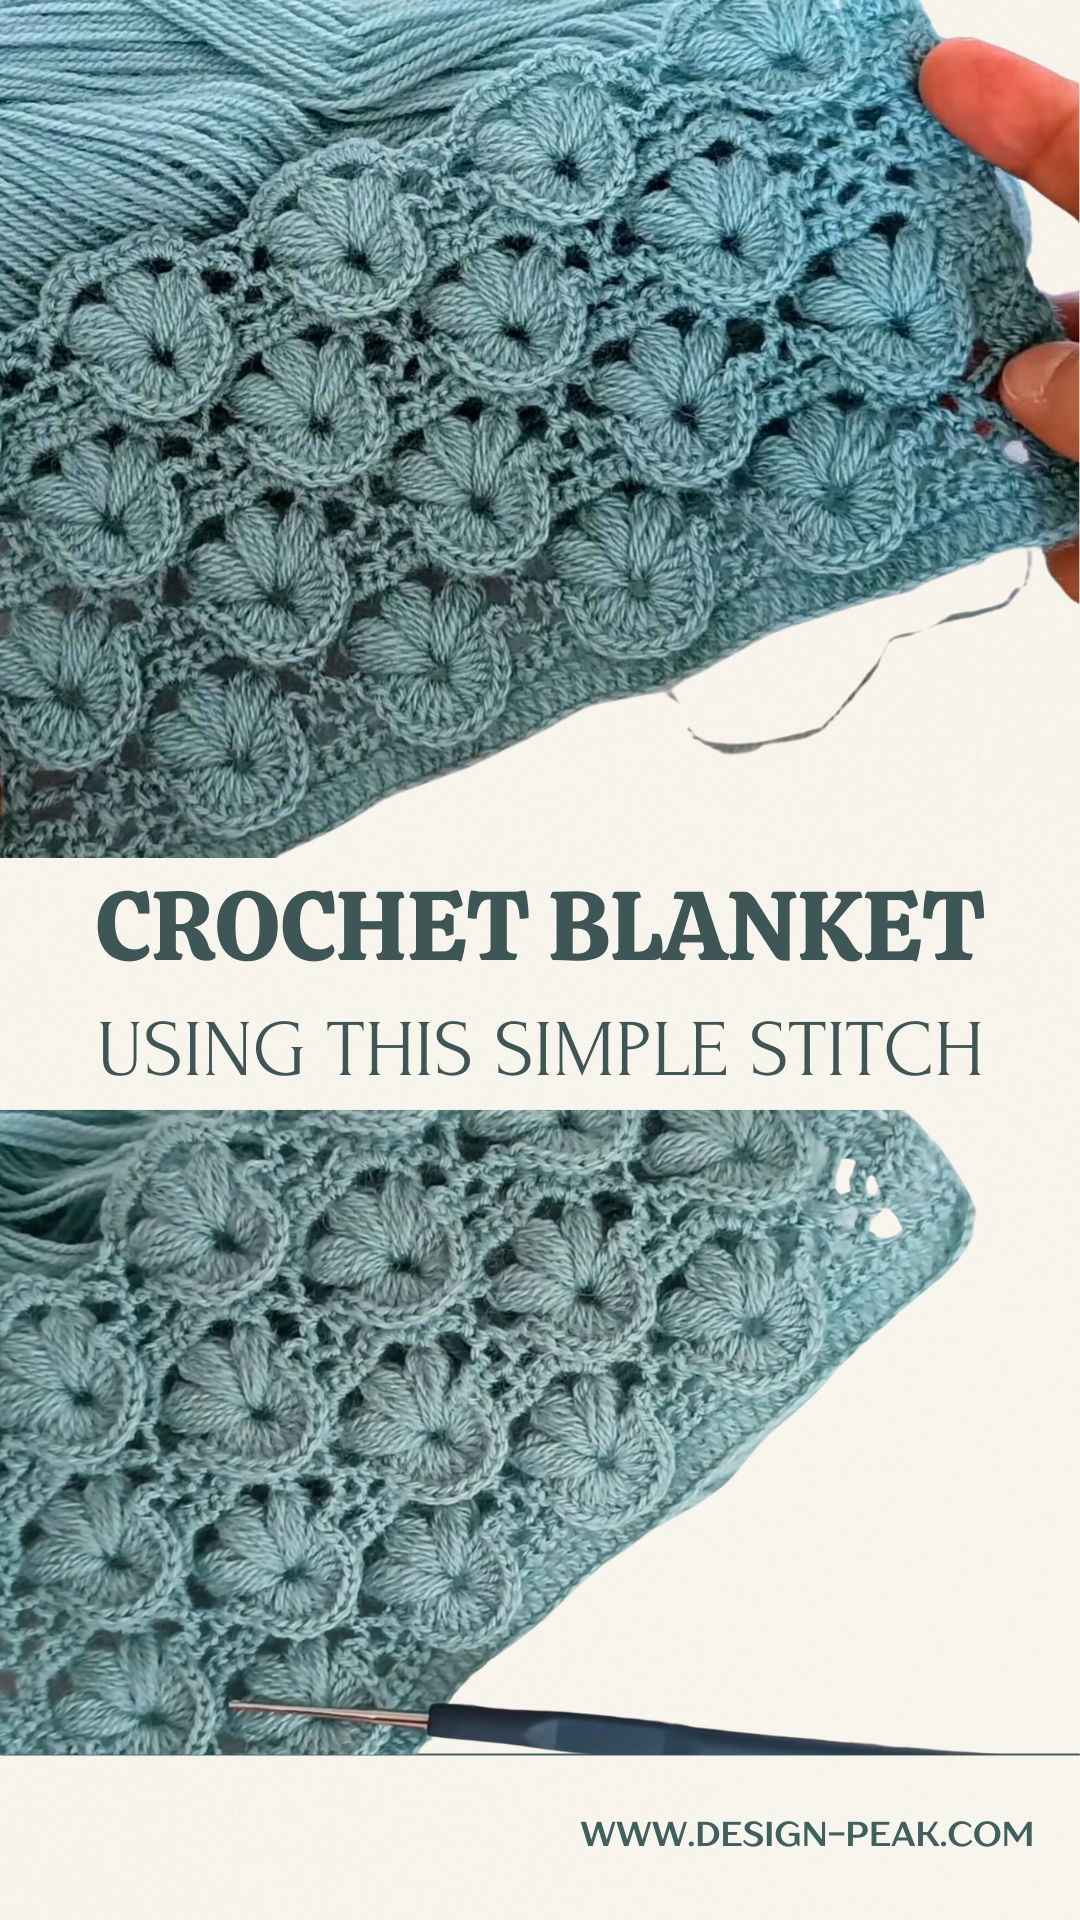 Crochet Blanket Using This Simple Stitch